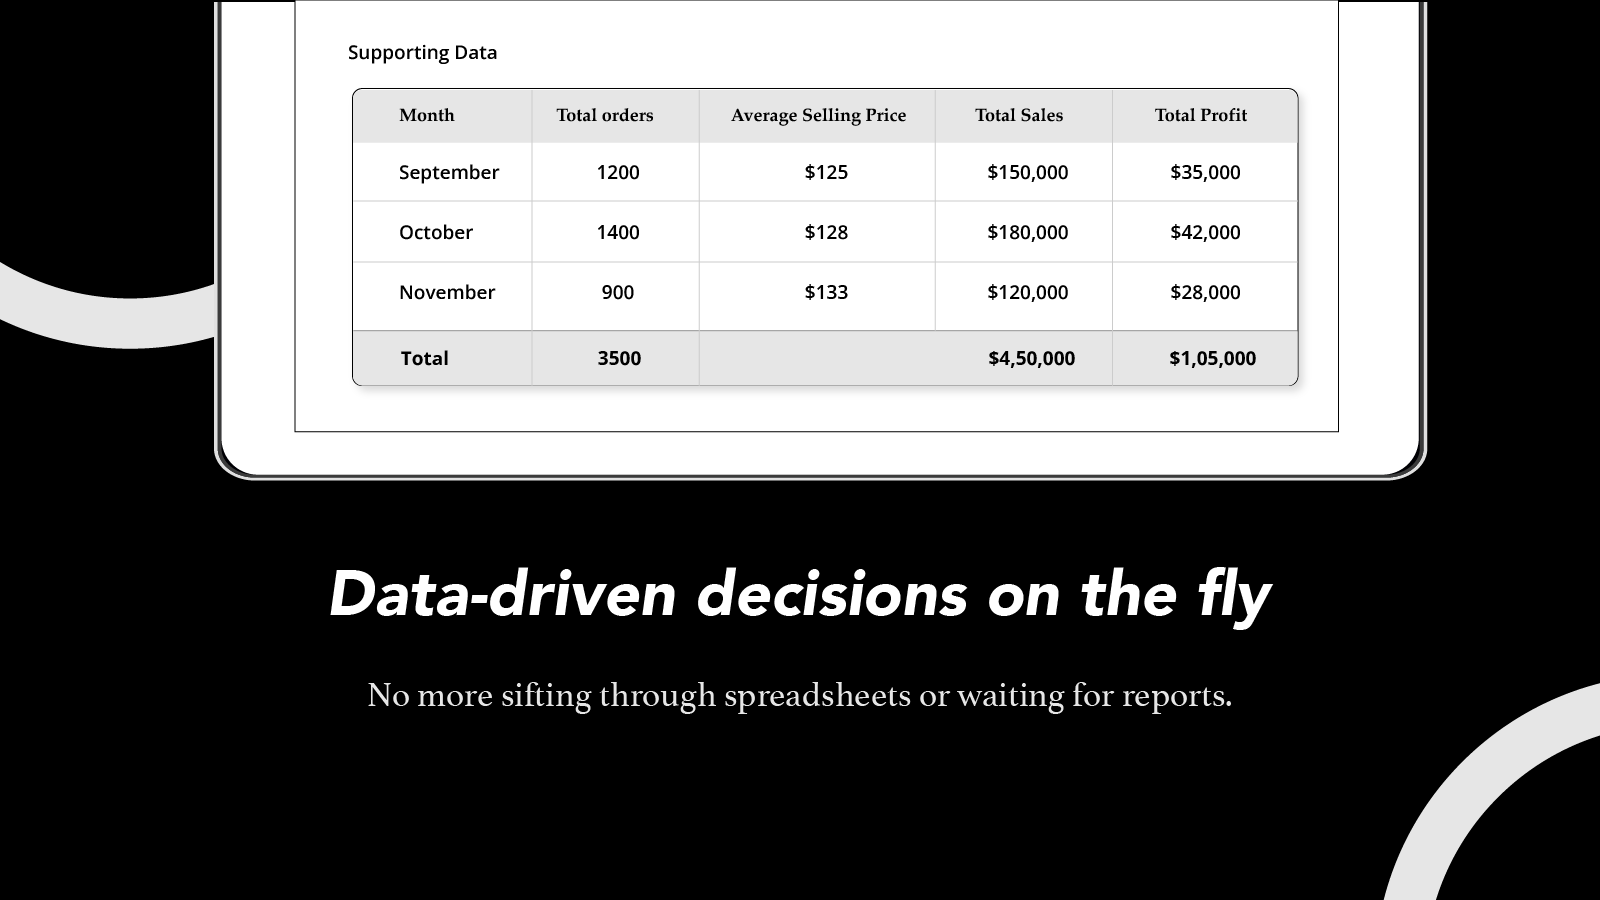 Data-driven decisions on the fly